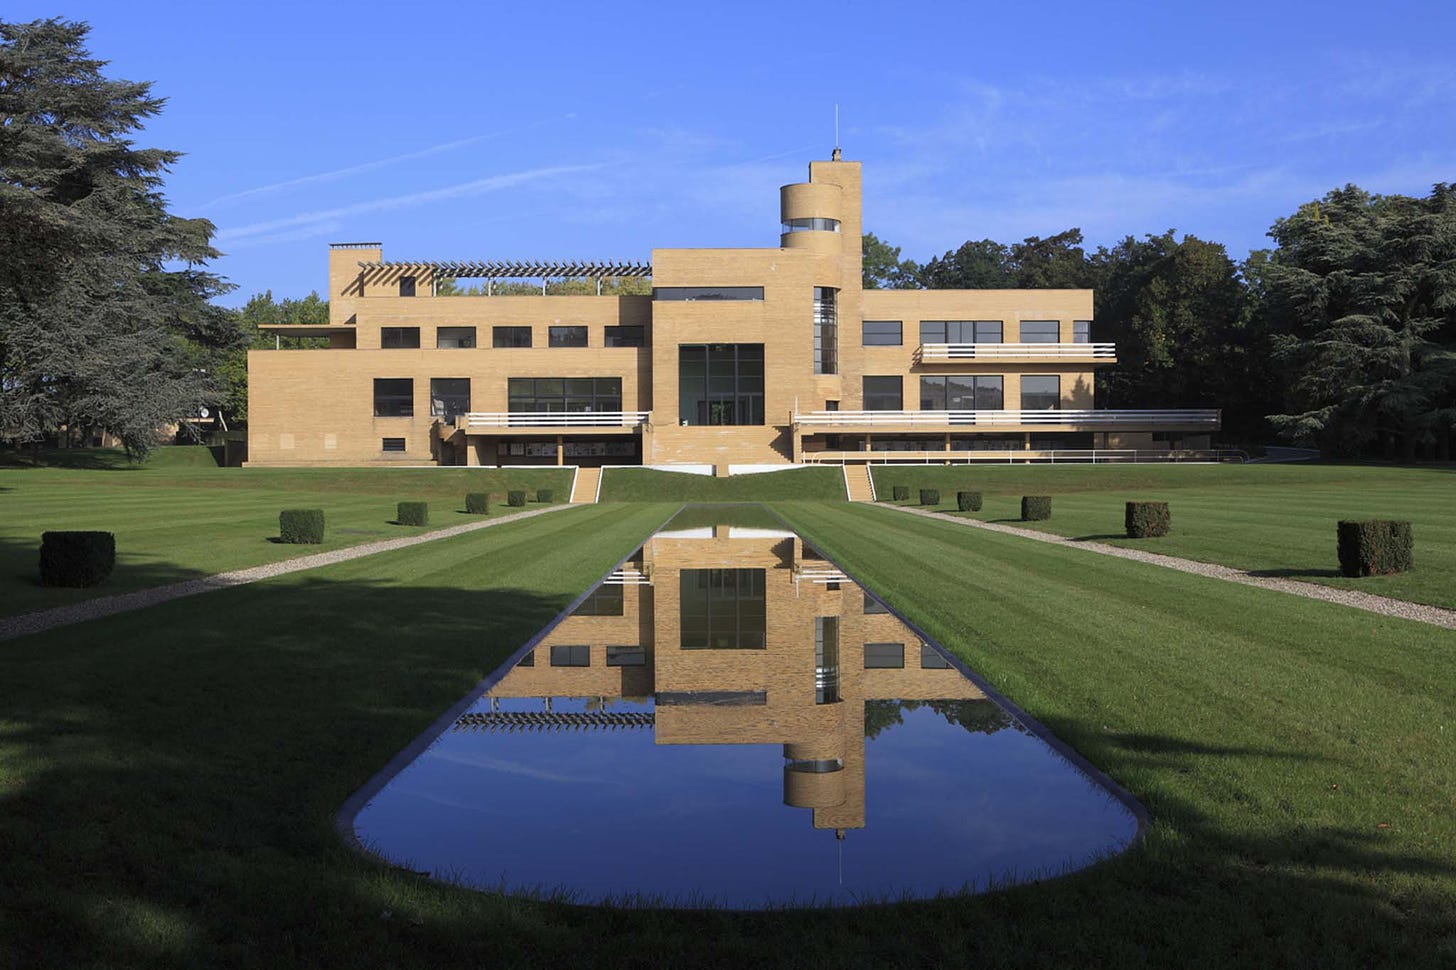 Photo shows a south view of Villa Cavrois in France, designed by Robert Mallet-Stevens. This is a modernist mansion house, with minimal styling and a long rectangular lake stretching towards the foreground.